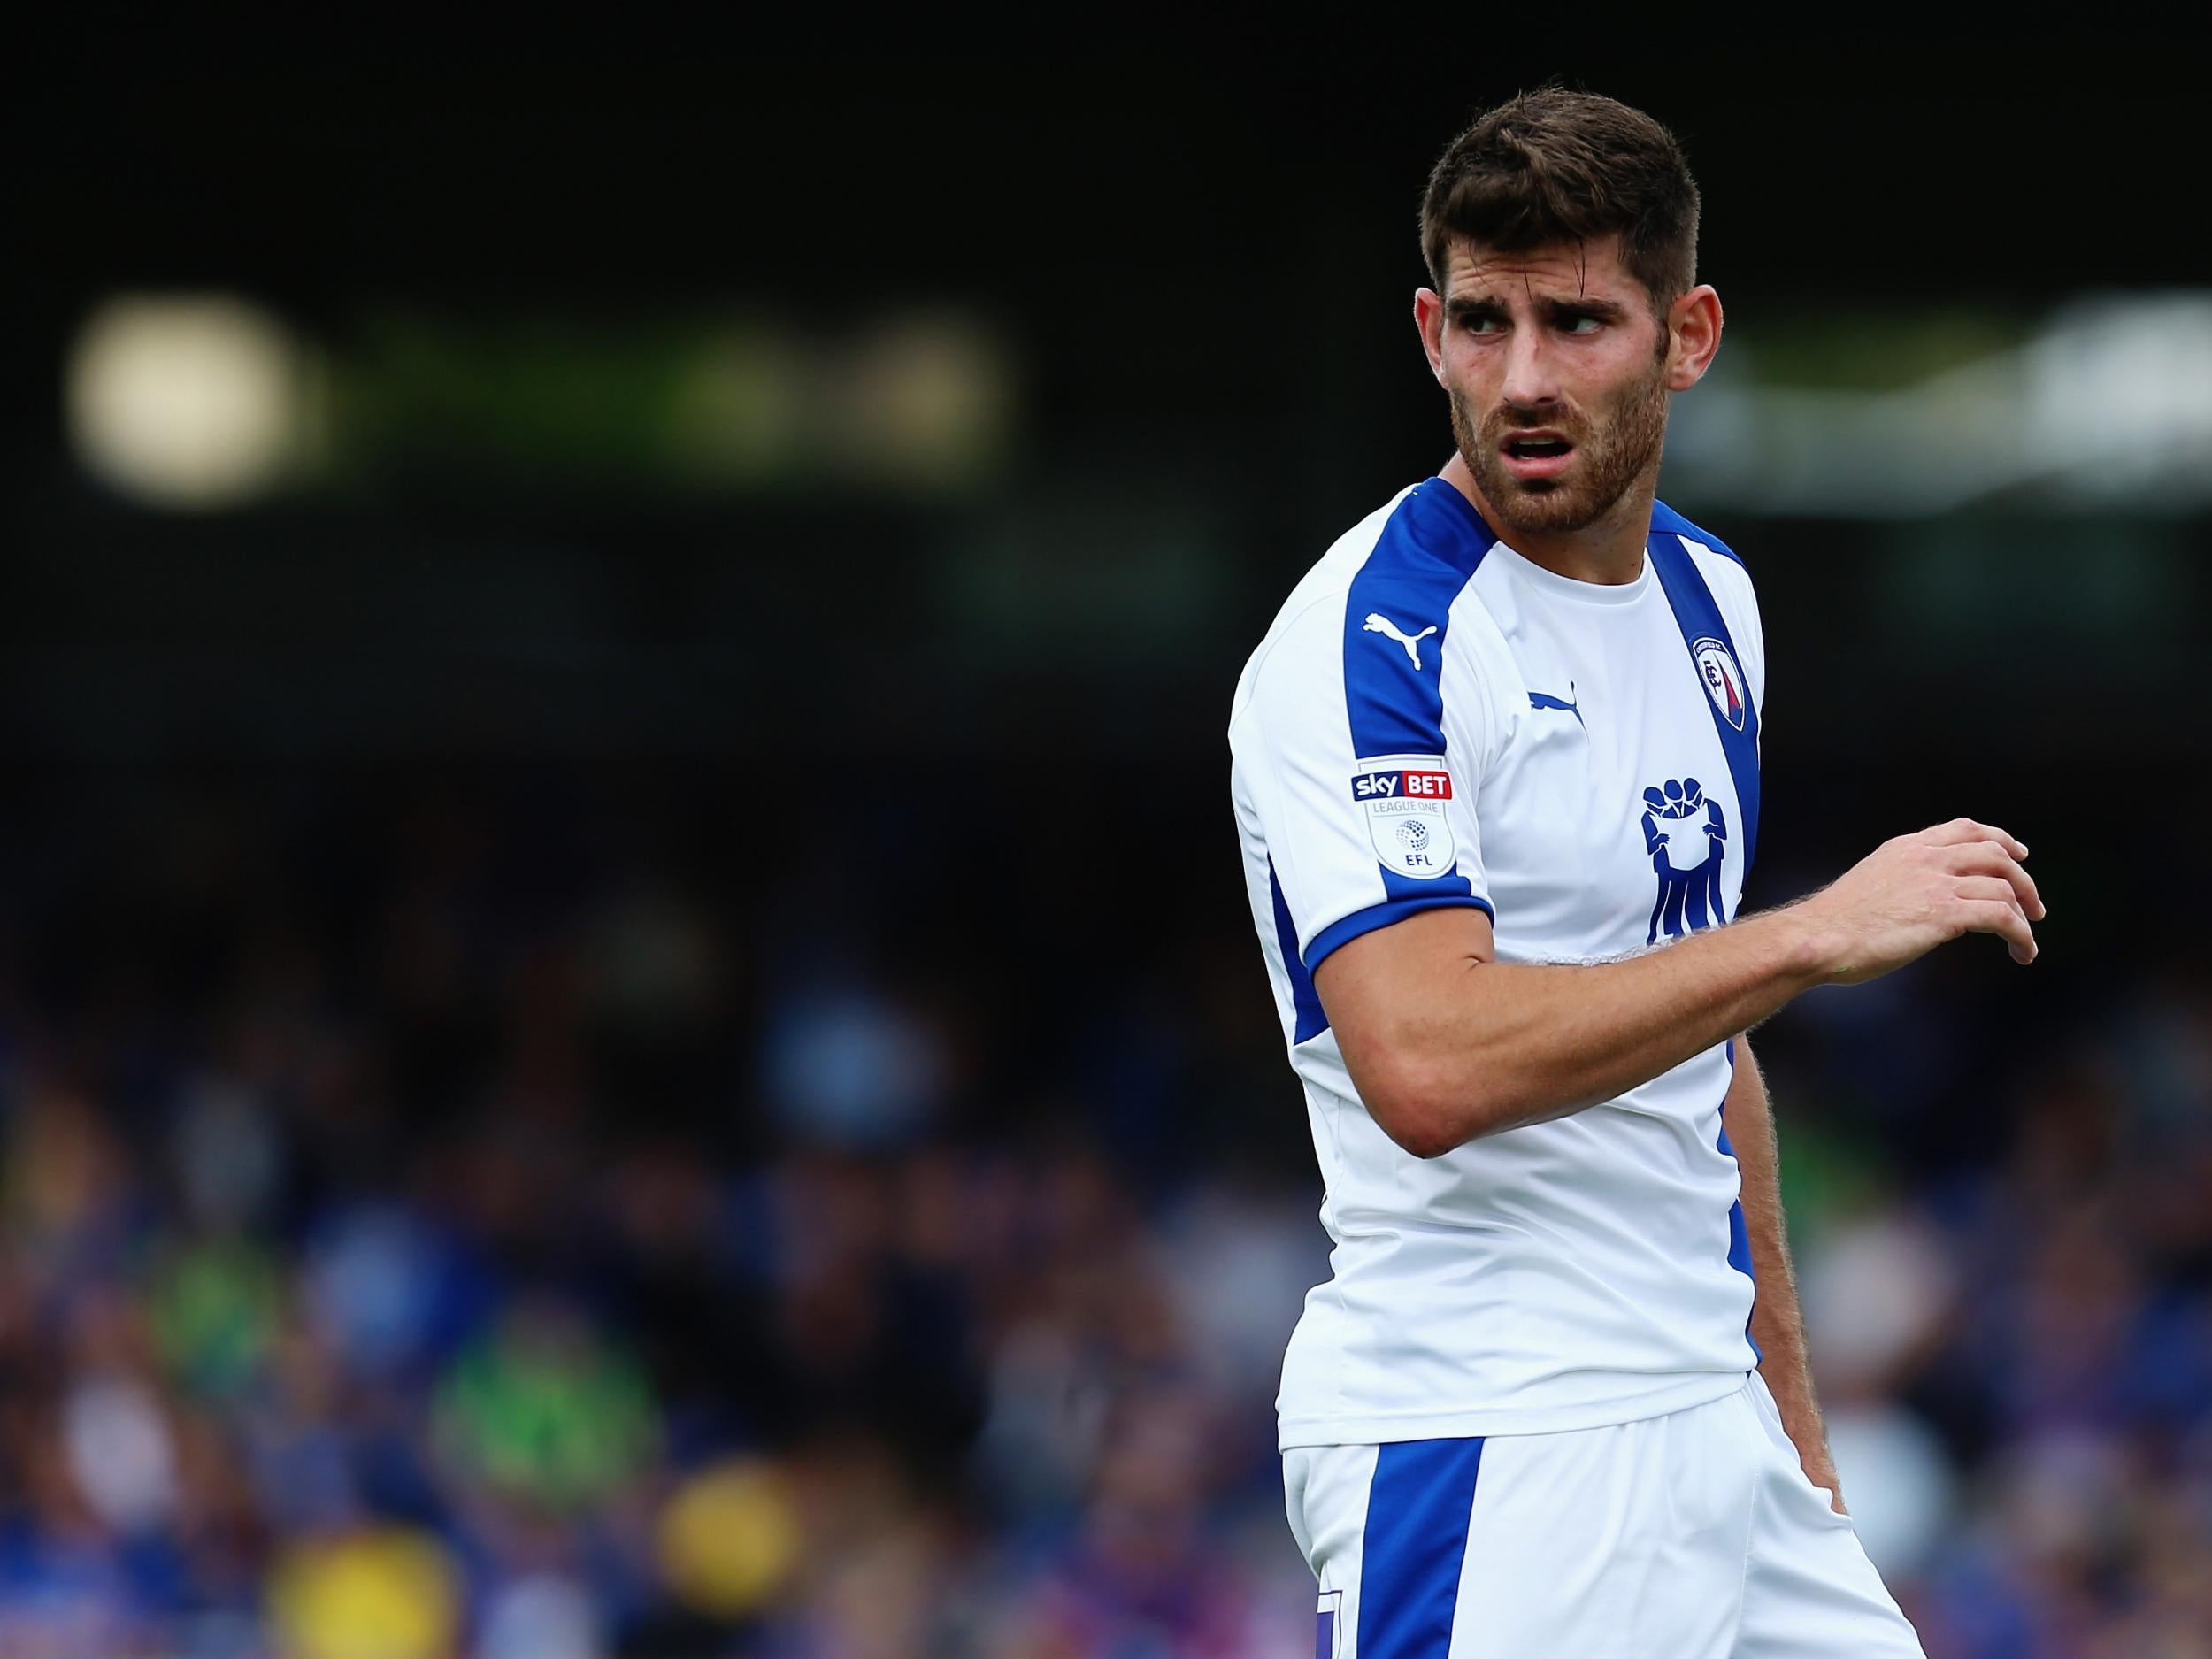 Evans has scored four goals for Chesterfield this season